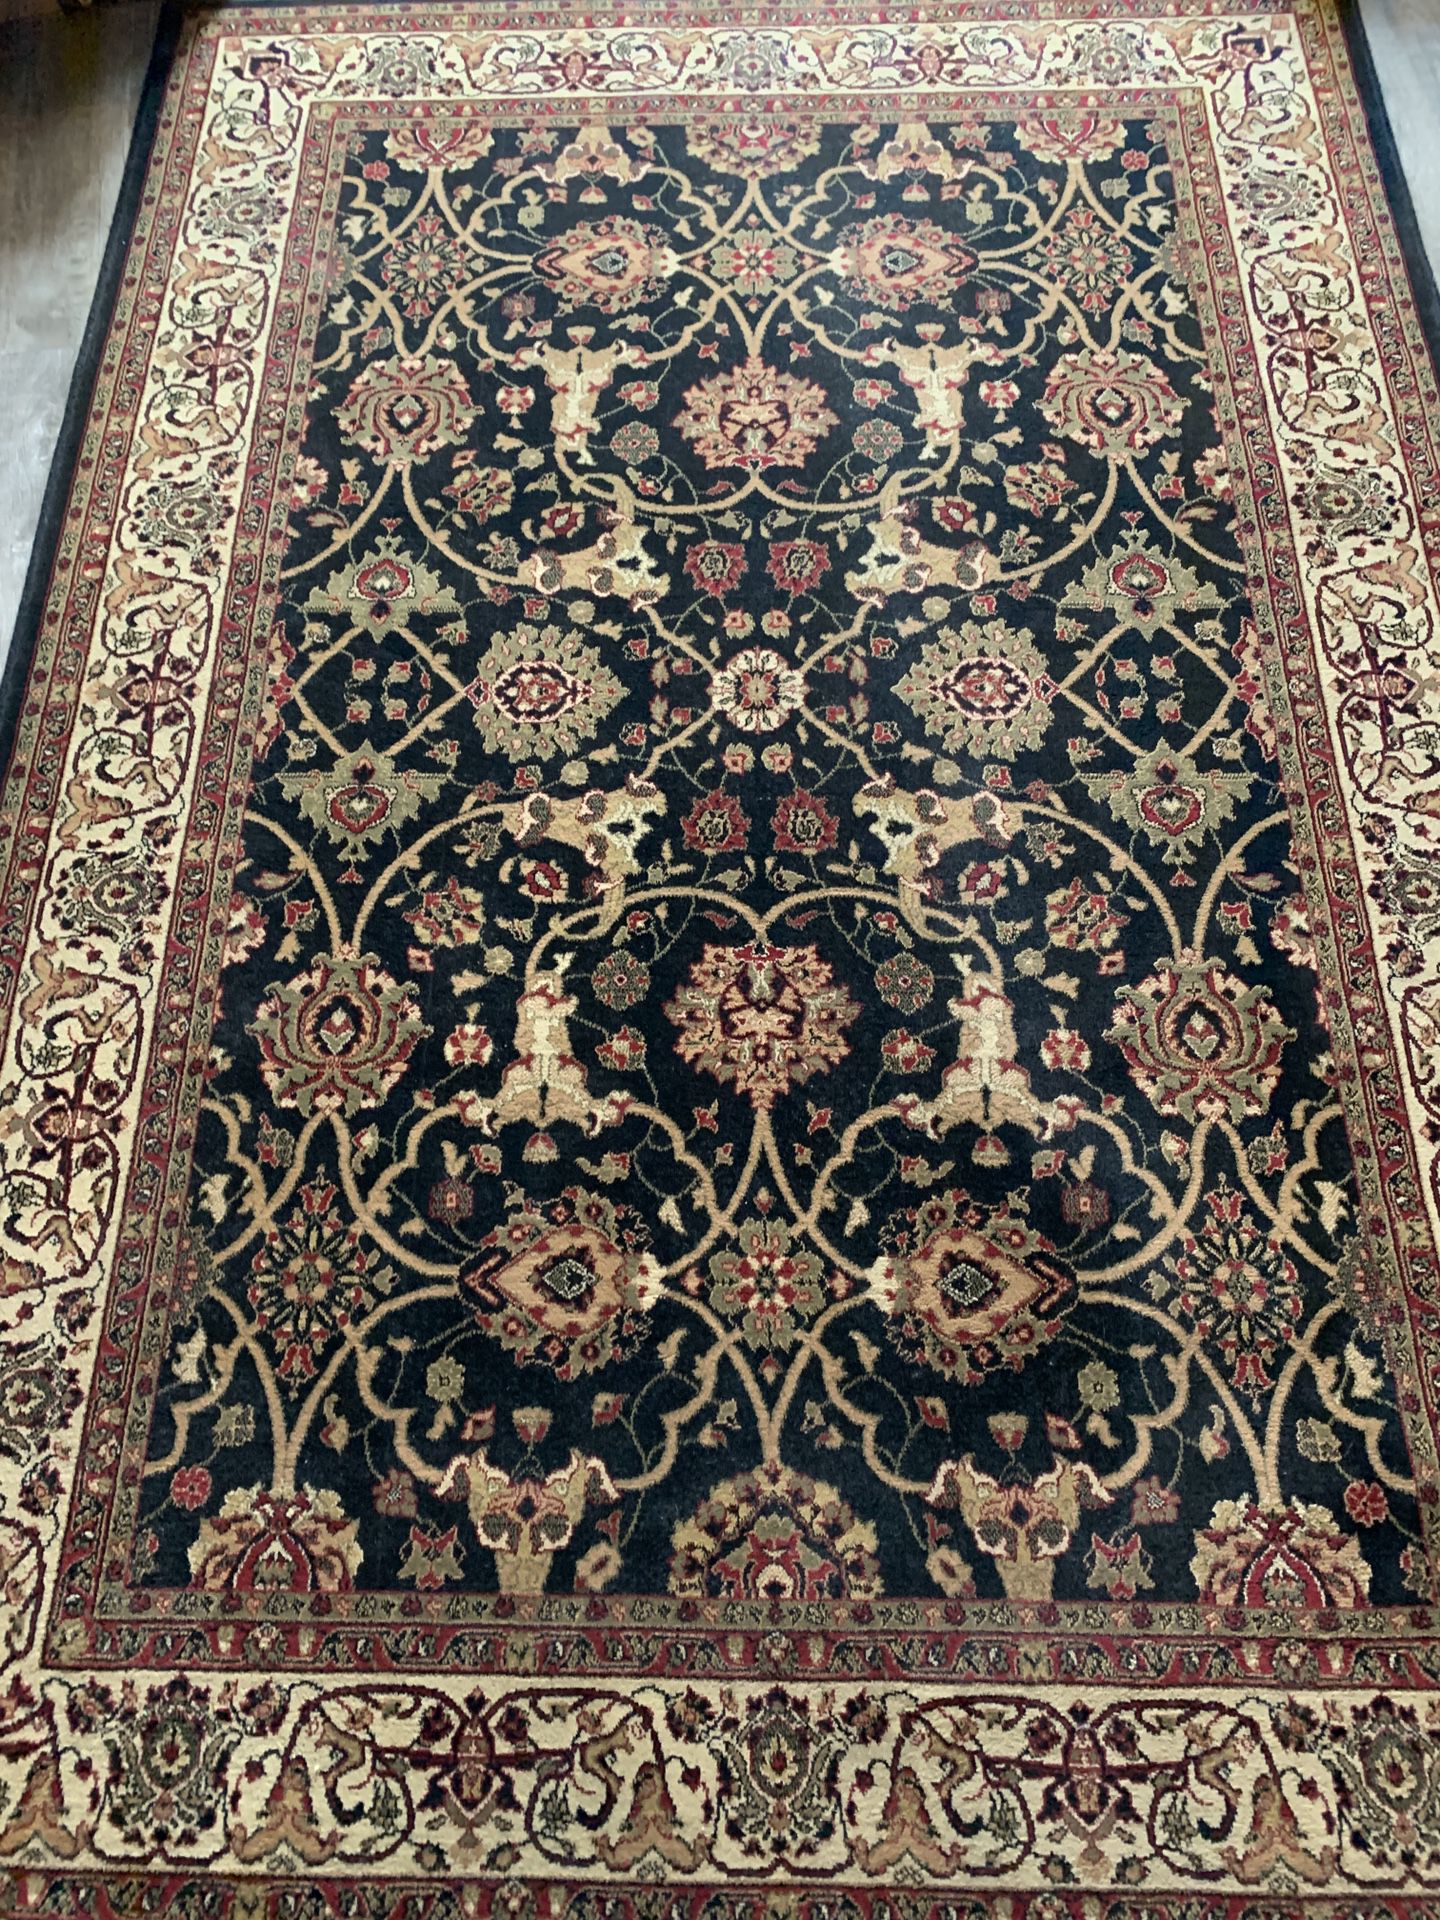 Black and Tan Area Rug from Kirklands